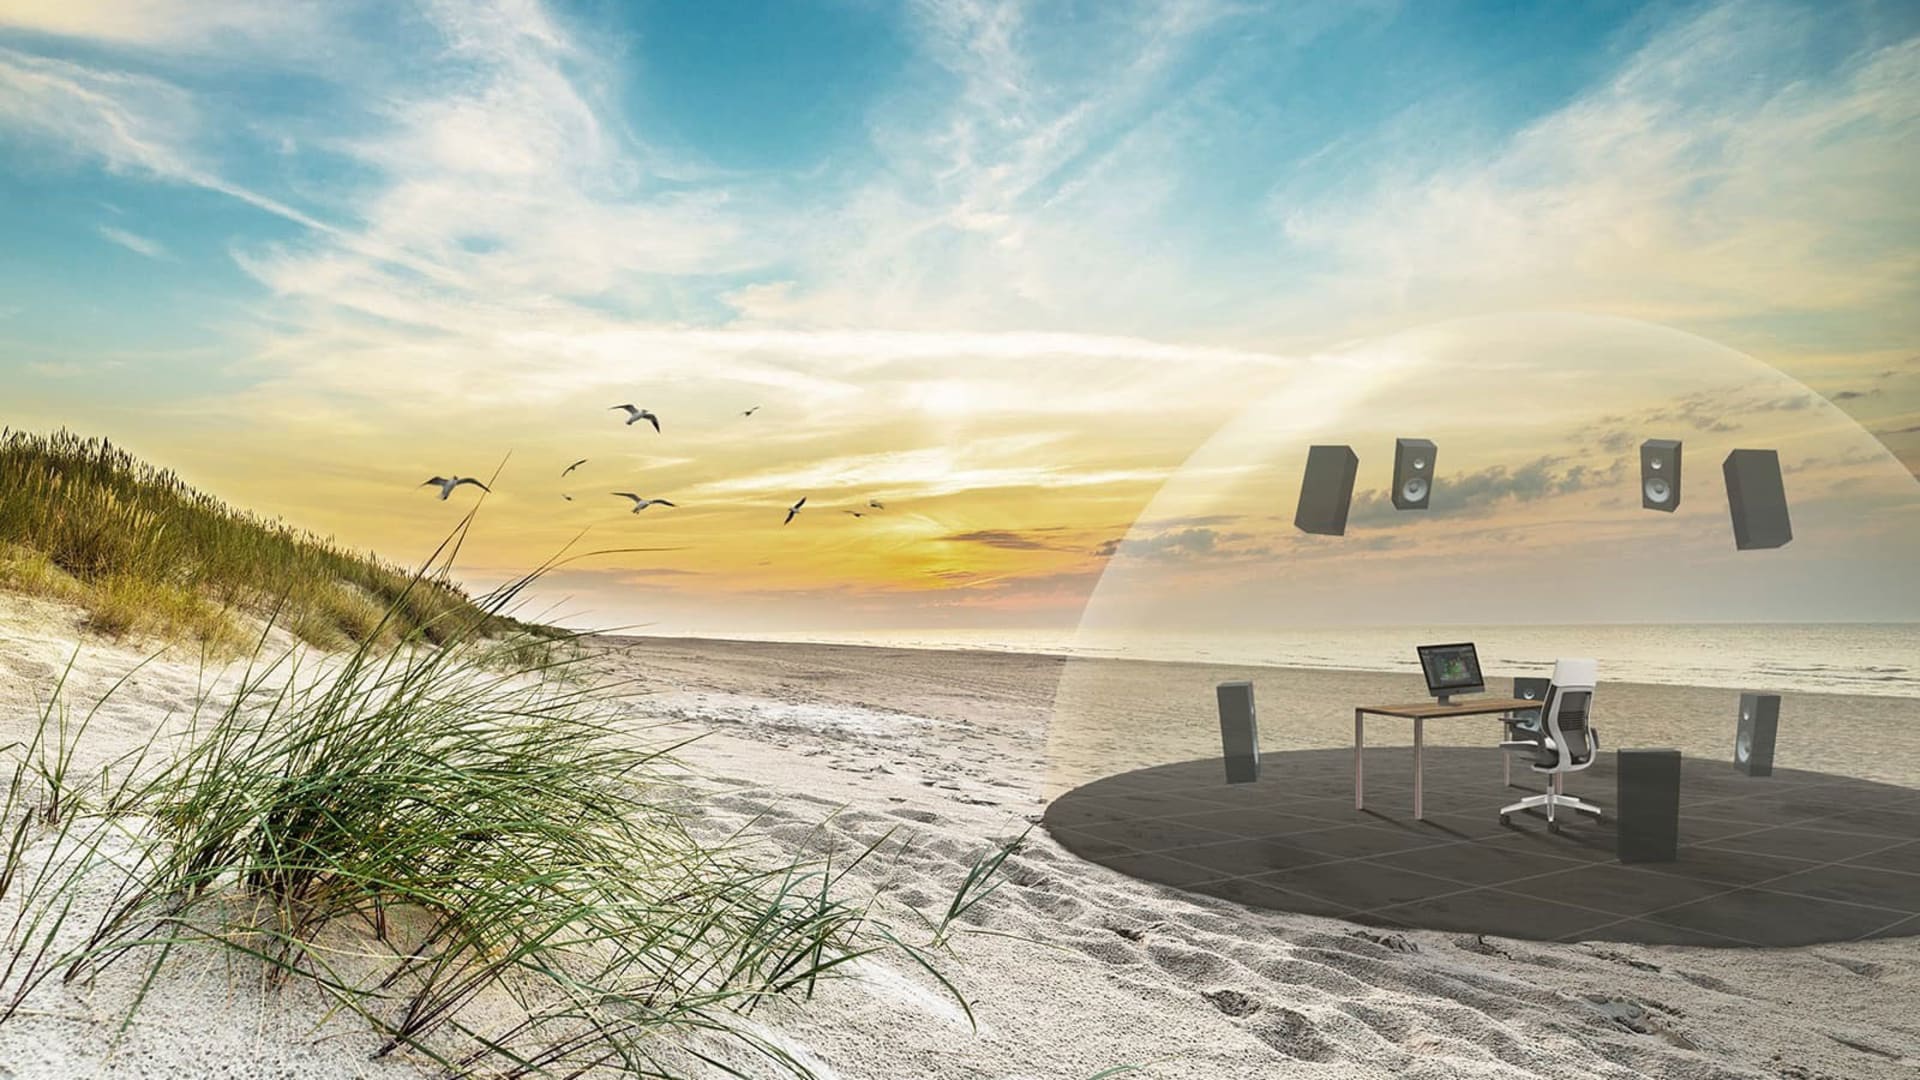 Immersive sound can transport a worker sitting at their desk to the beach or other relaxing landscapes.